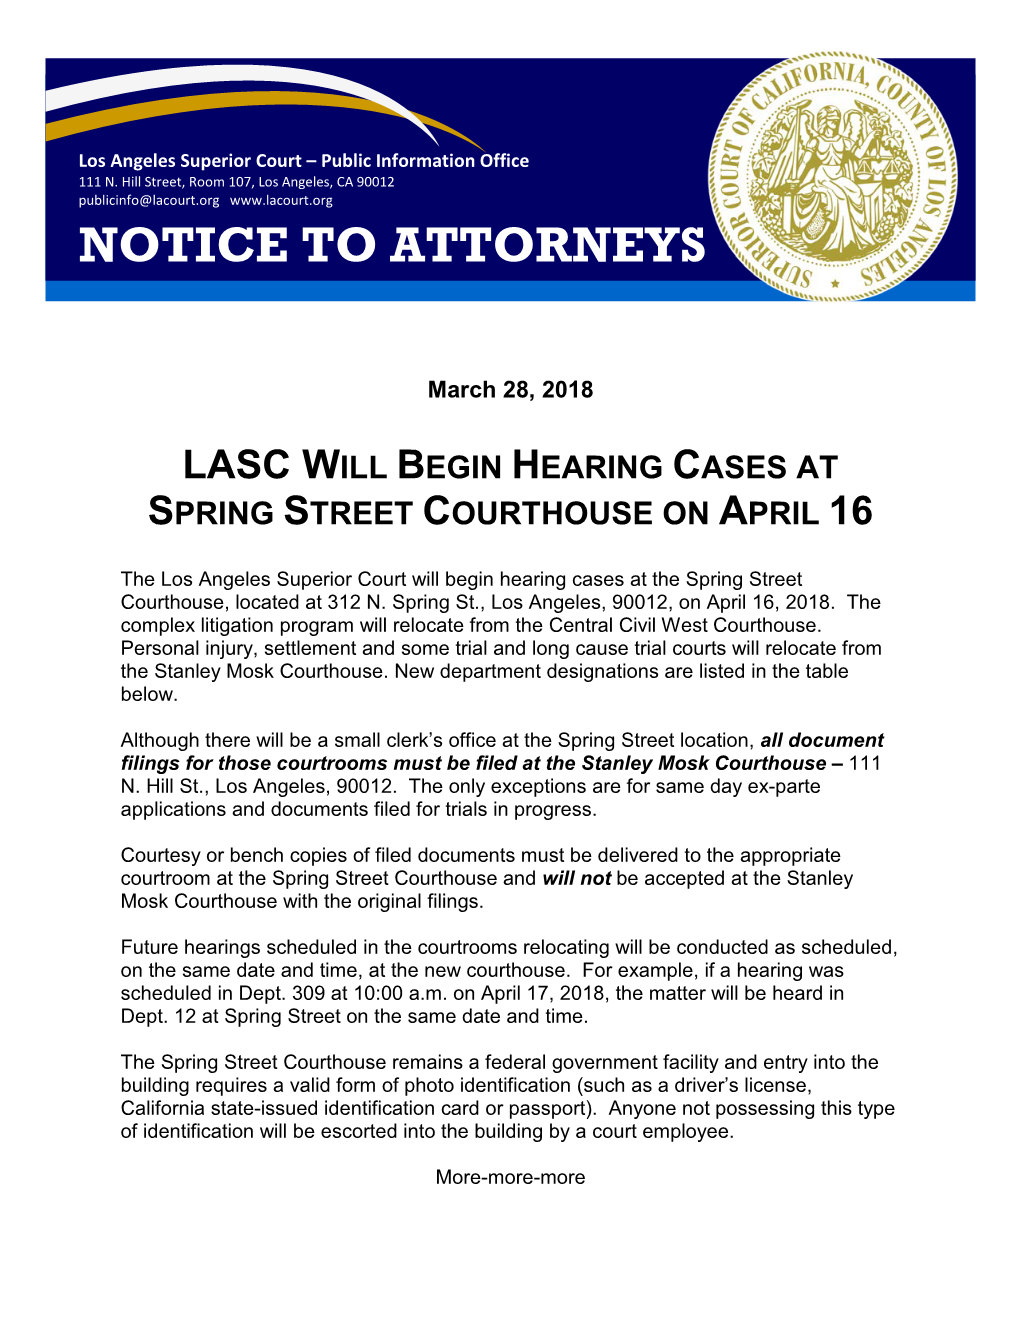 Lasc Will Begin Hearing Cases at Spring Street Courthouse on April 16